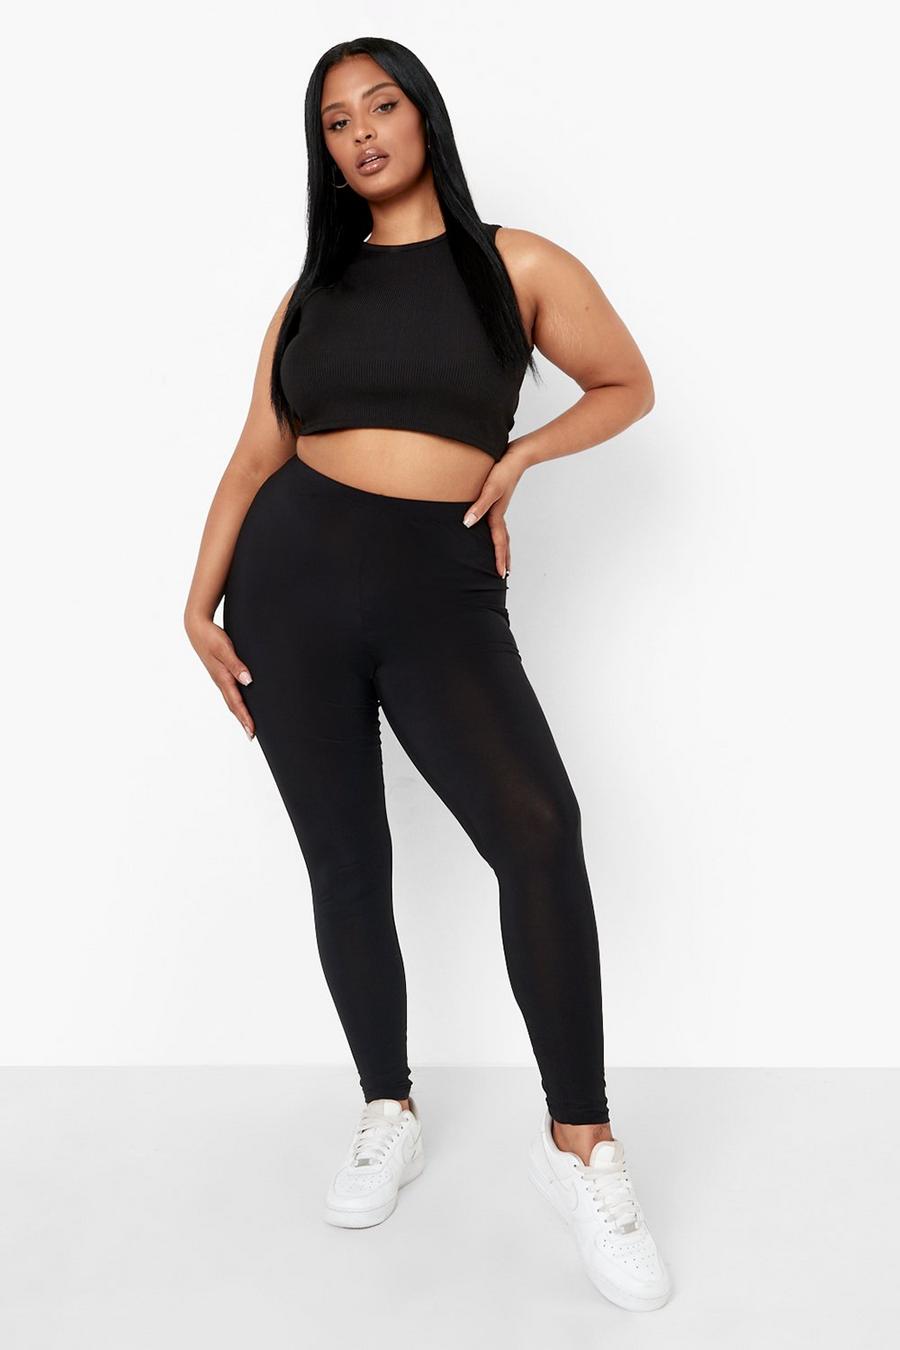 HSMQHJWE Workout Bottoms For Women New Mix Leggings Plus Size